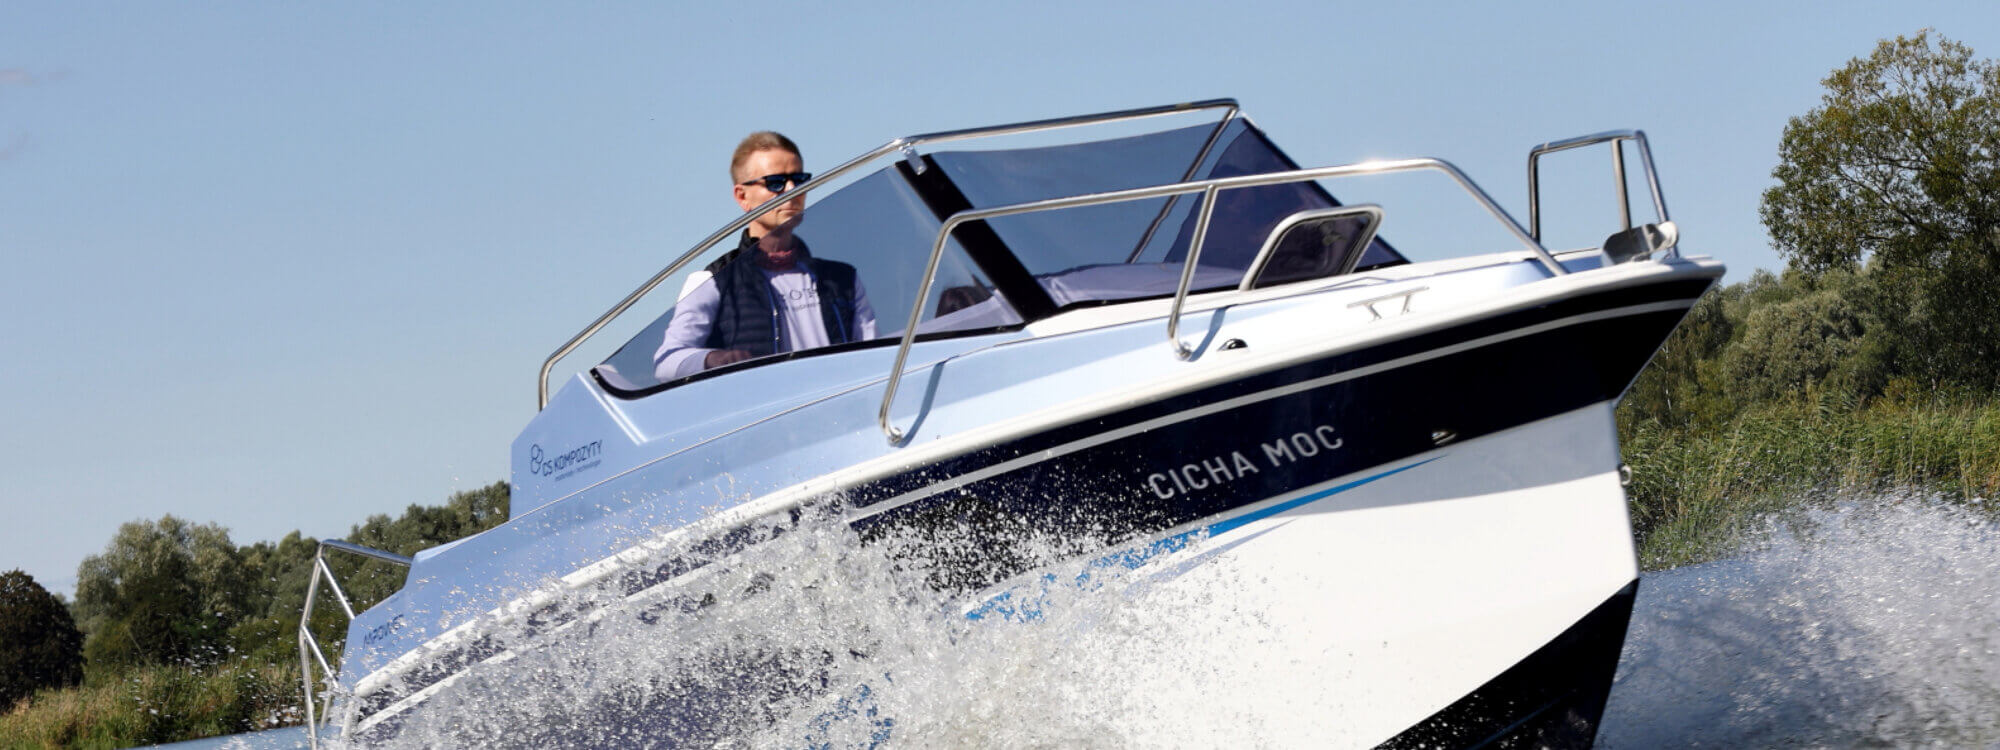 CSK and Scott Bader create the world’s first hydrogen-powered boat